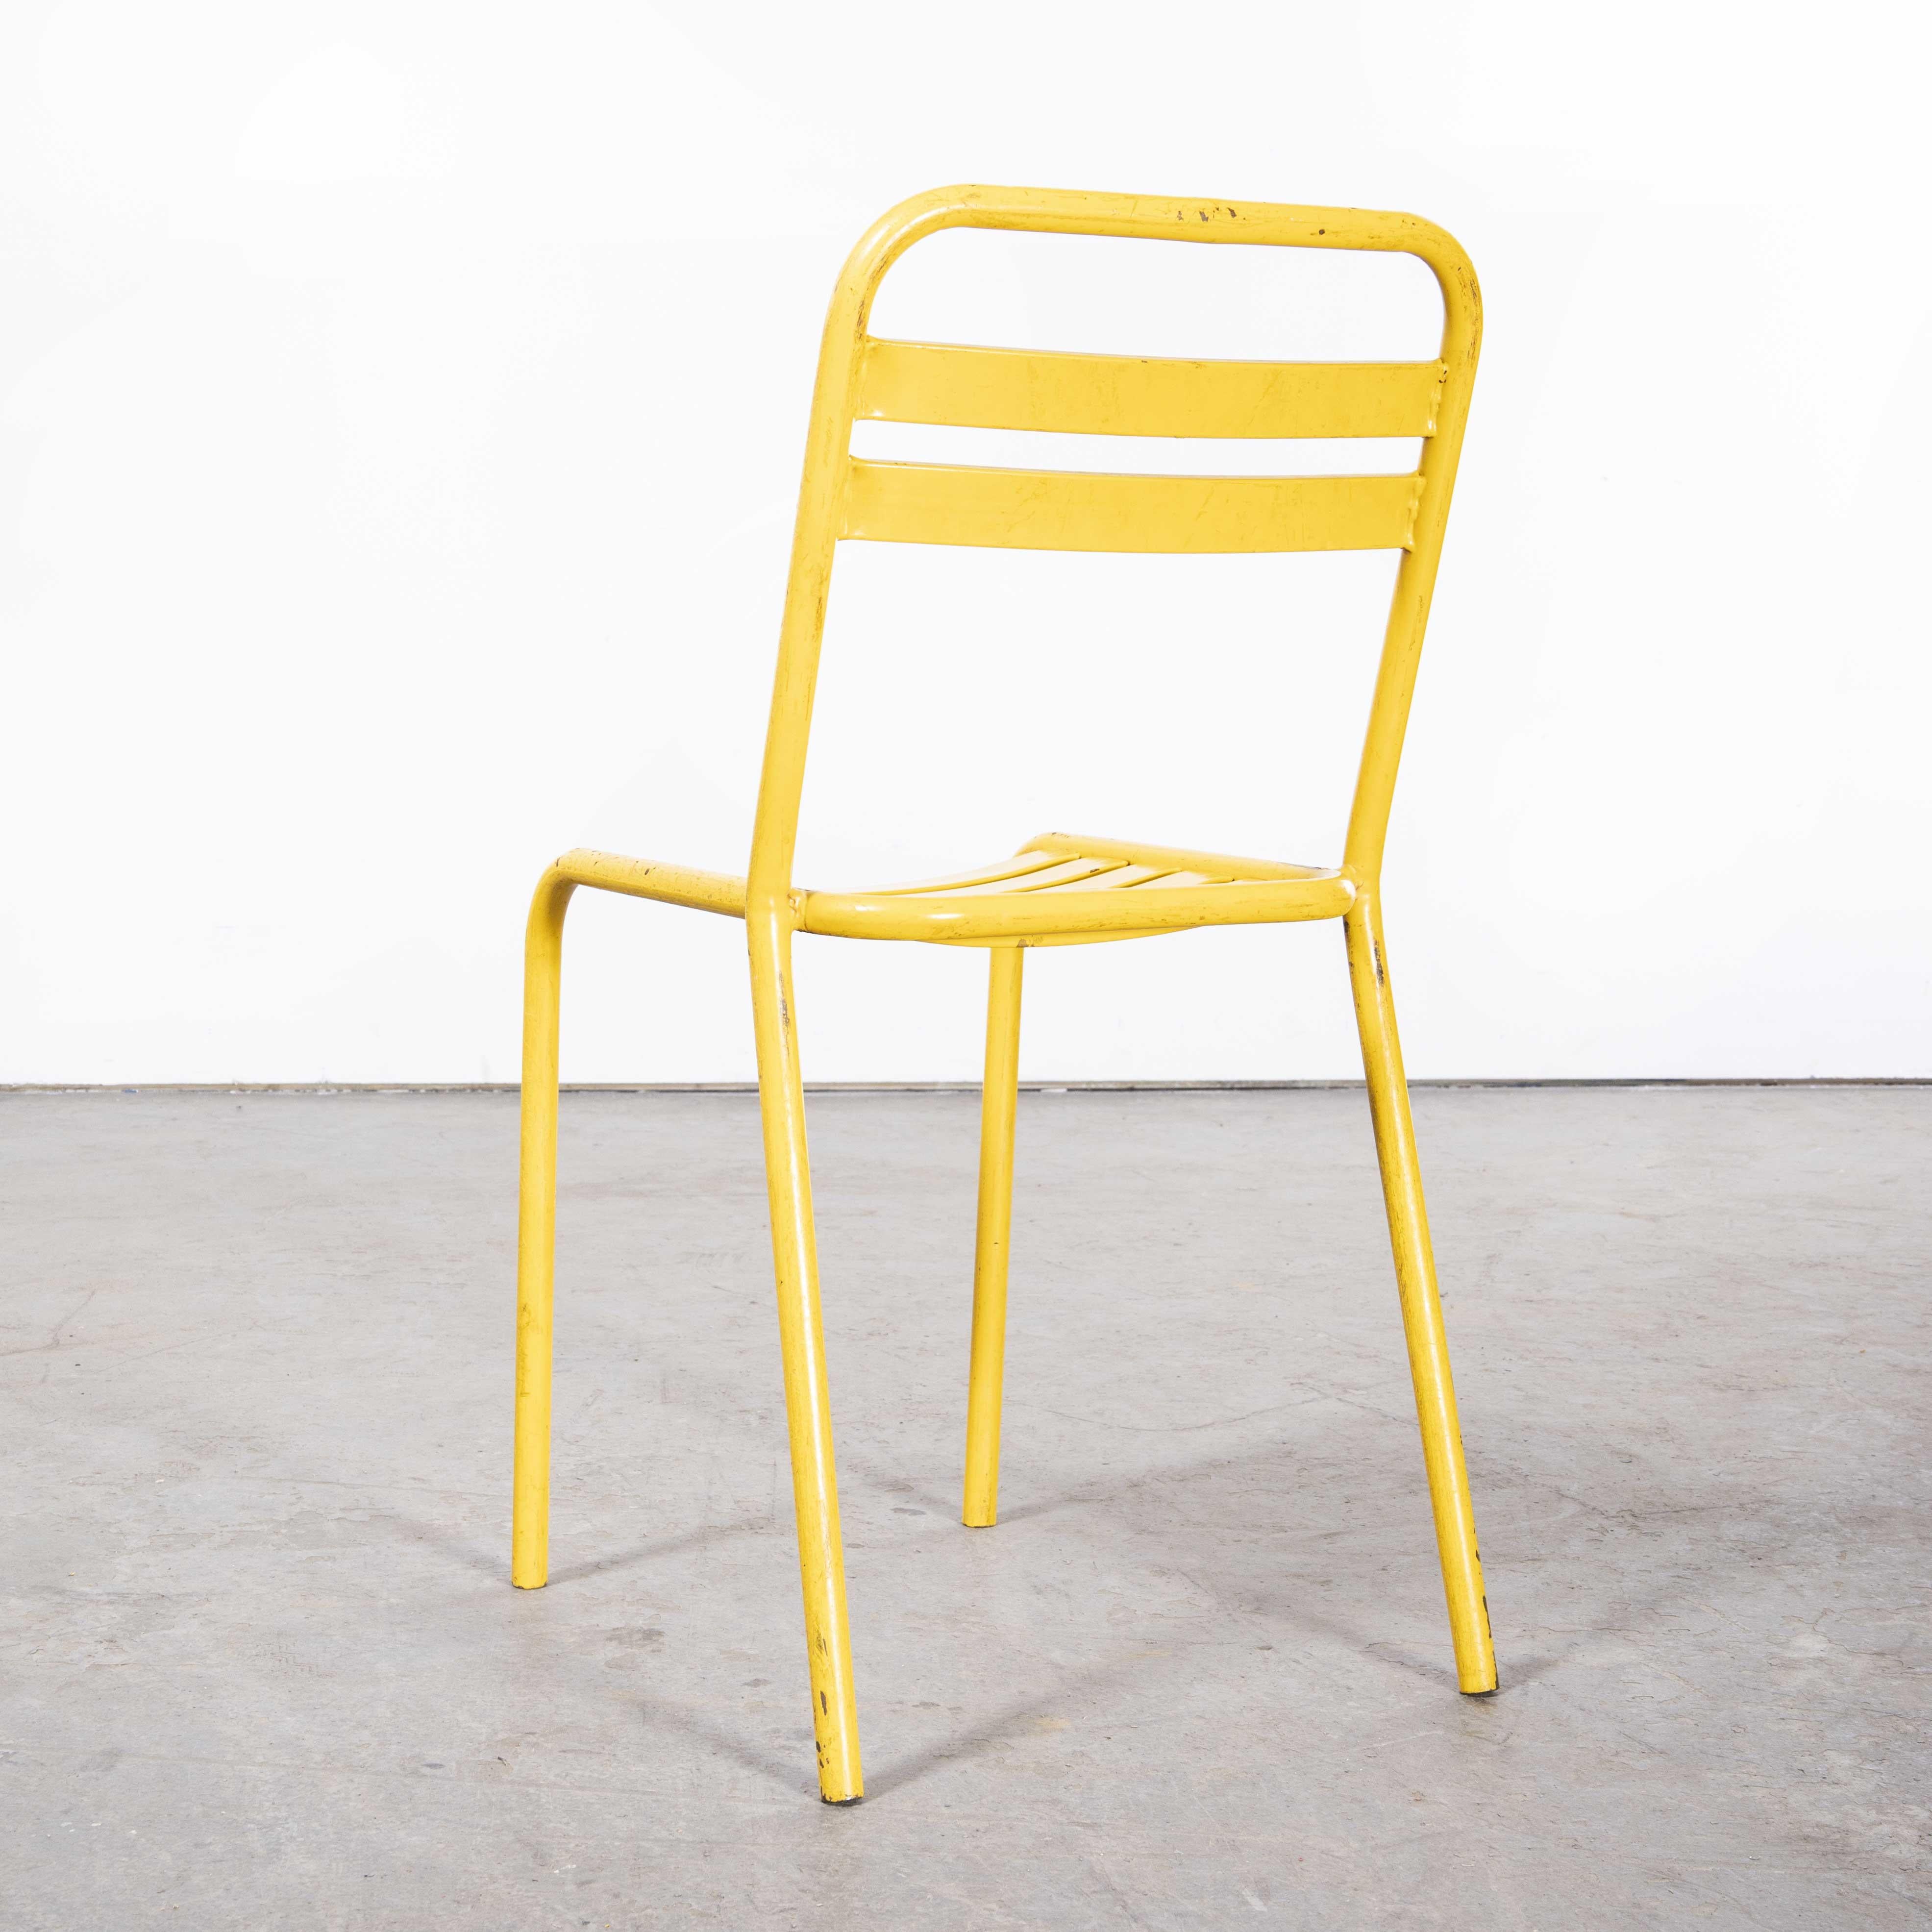 950's Original Yellow French Tolix T2 Metal Café Dining Chairs - Pair

1950's Original Yellow French Tolix T2 Metal Café Dining Chairs - Pair.  Please note the images show four chairs but the listing is just for the last two chairs we have. Tolix is